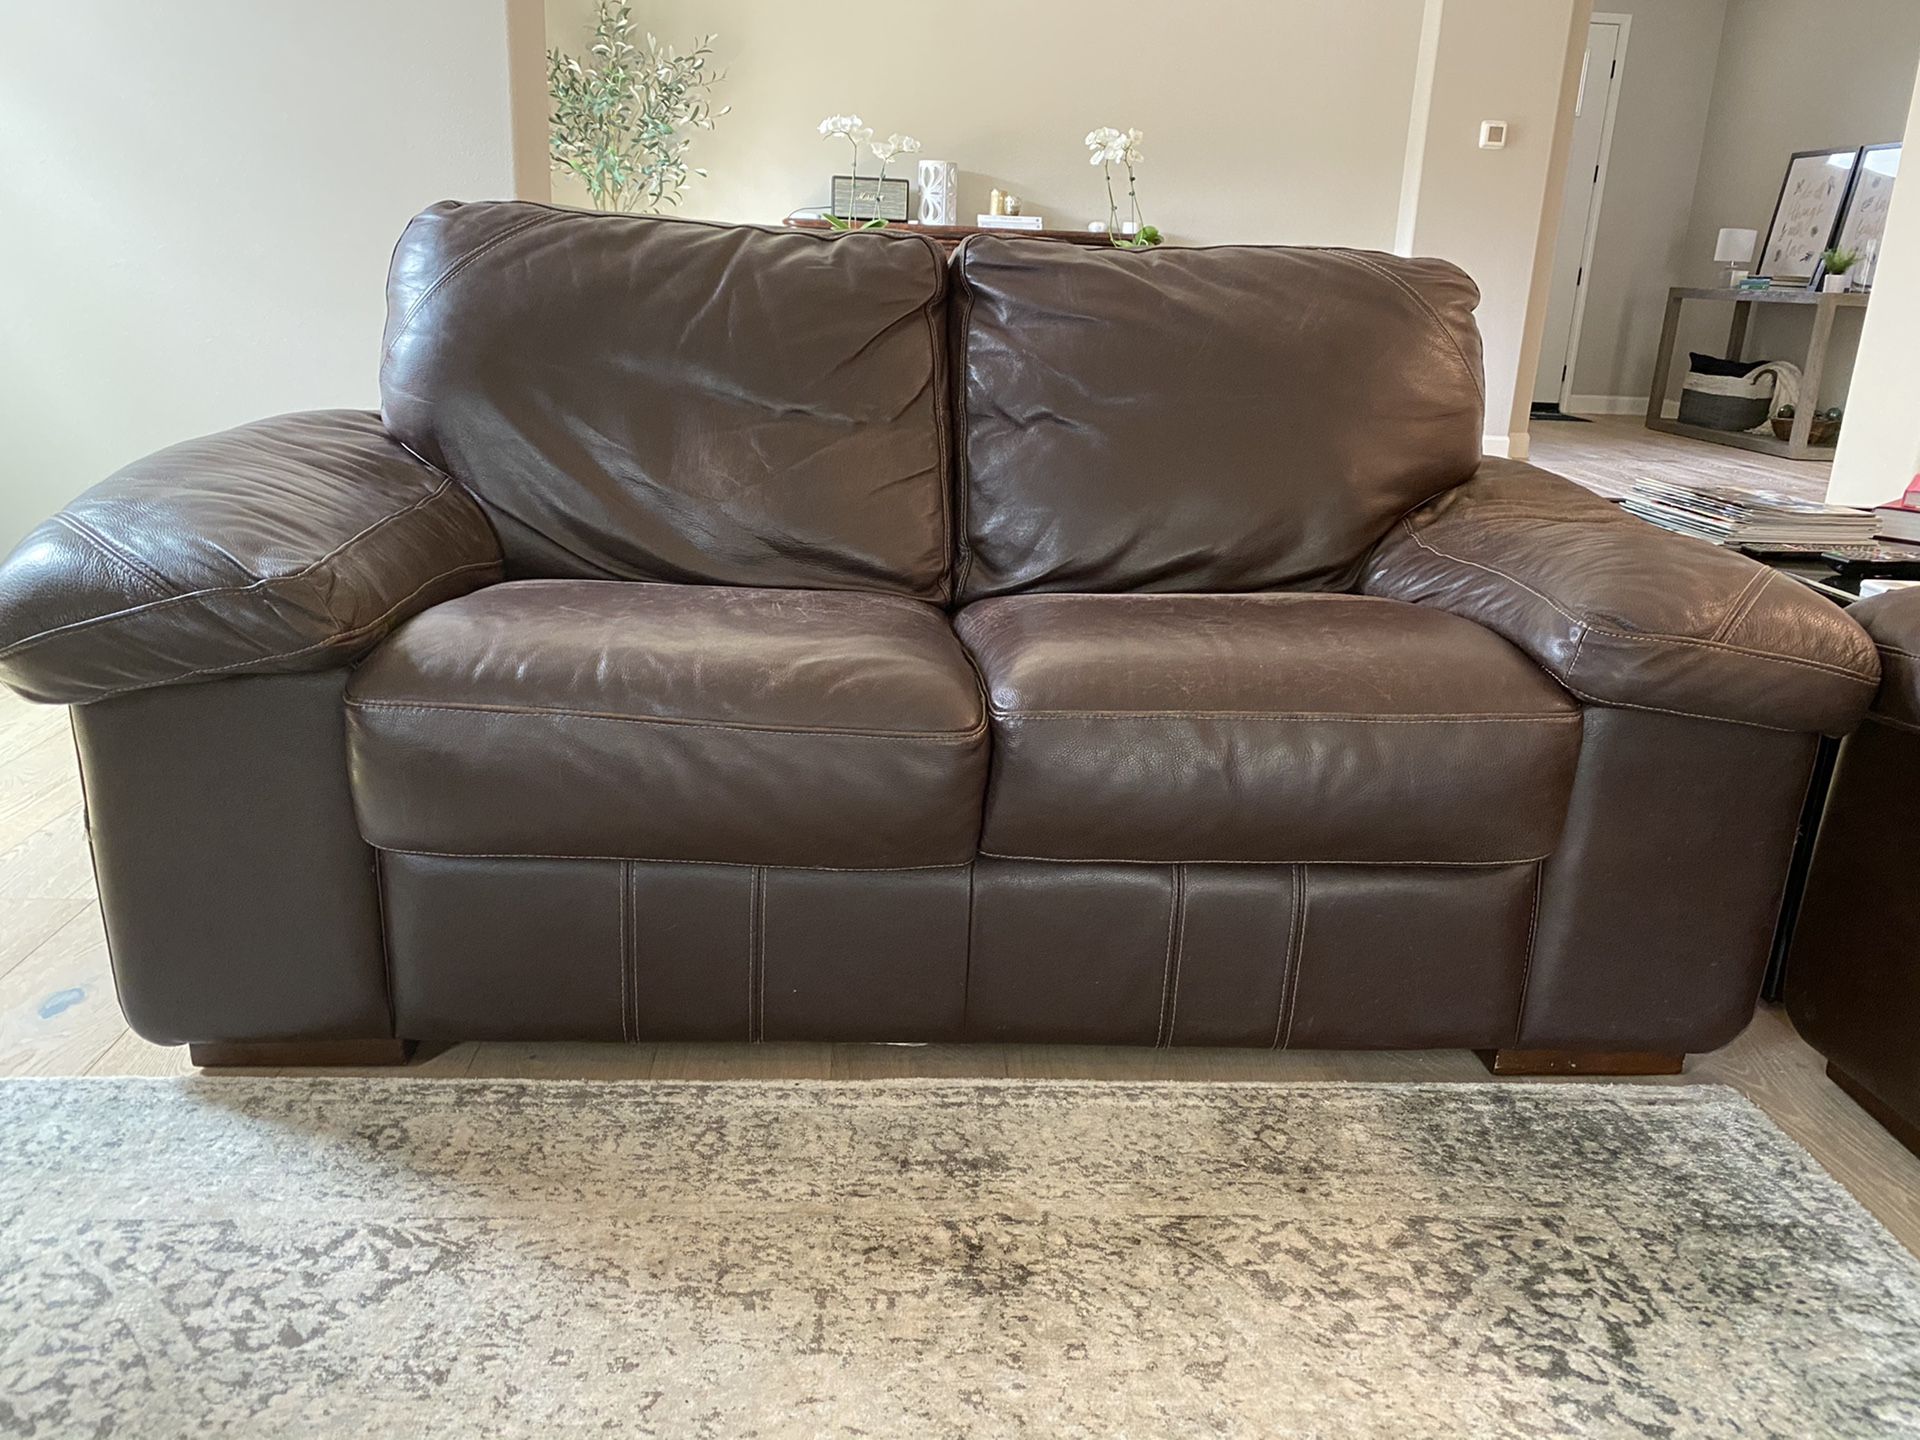 Espresso leather loveseat and ottoman